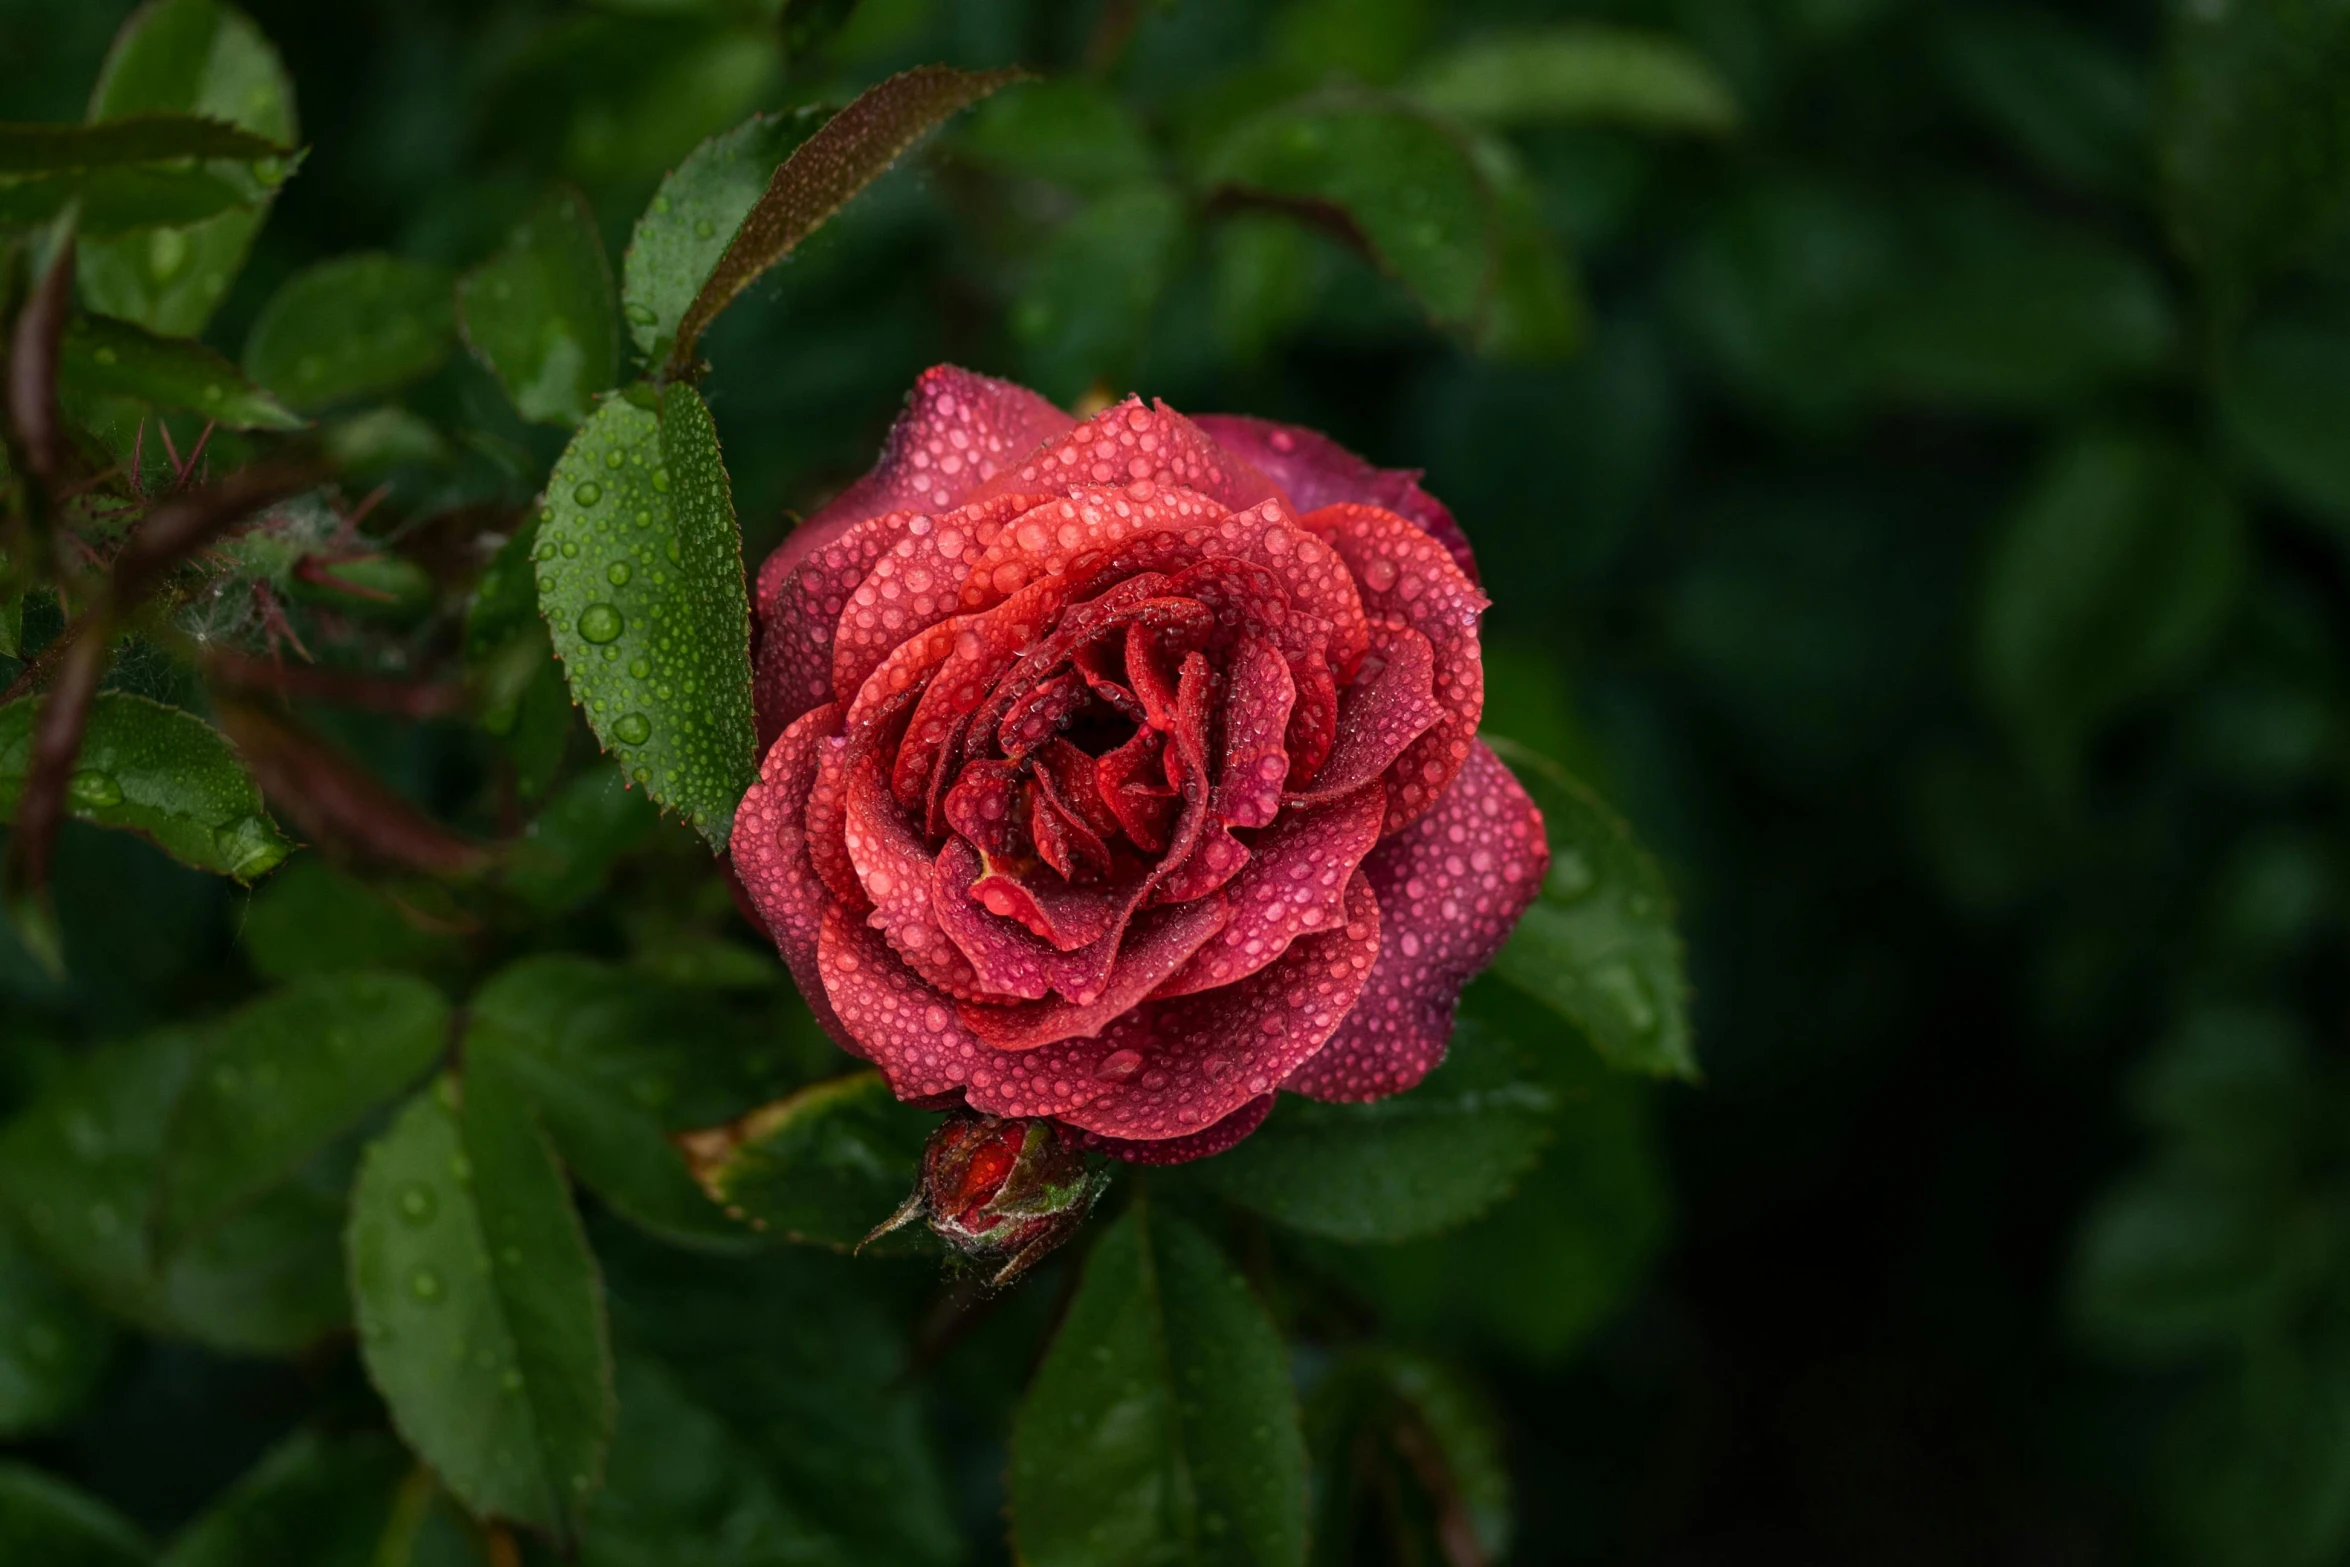 a red rose with water droplets hanging off the petals